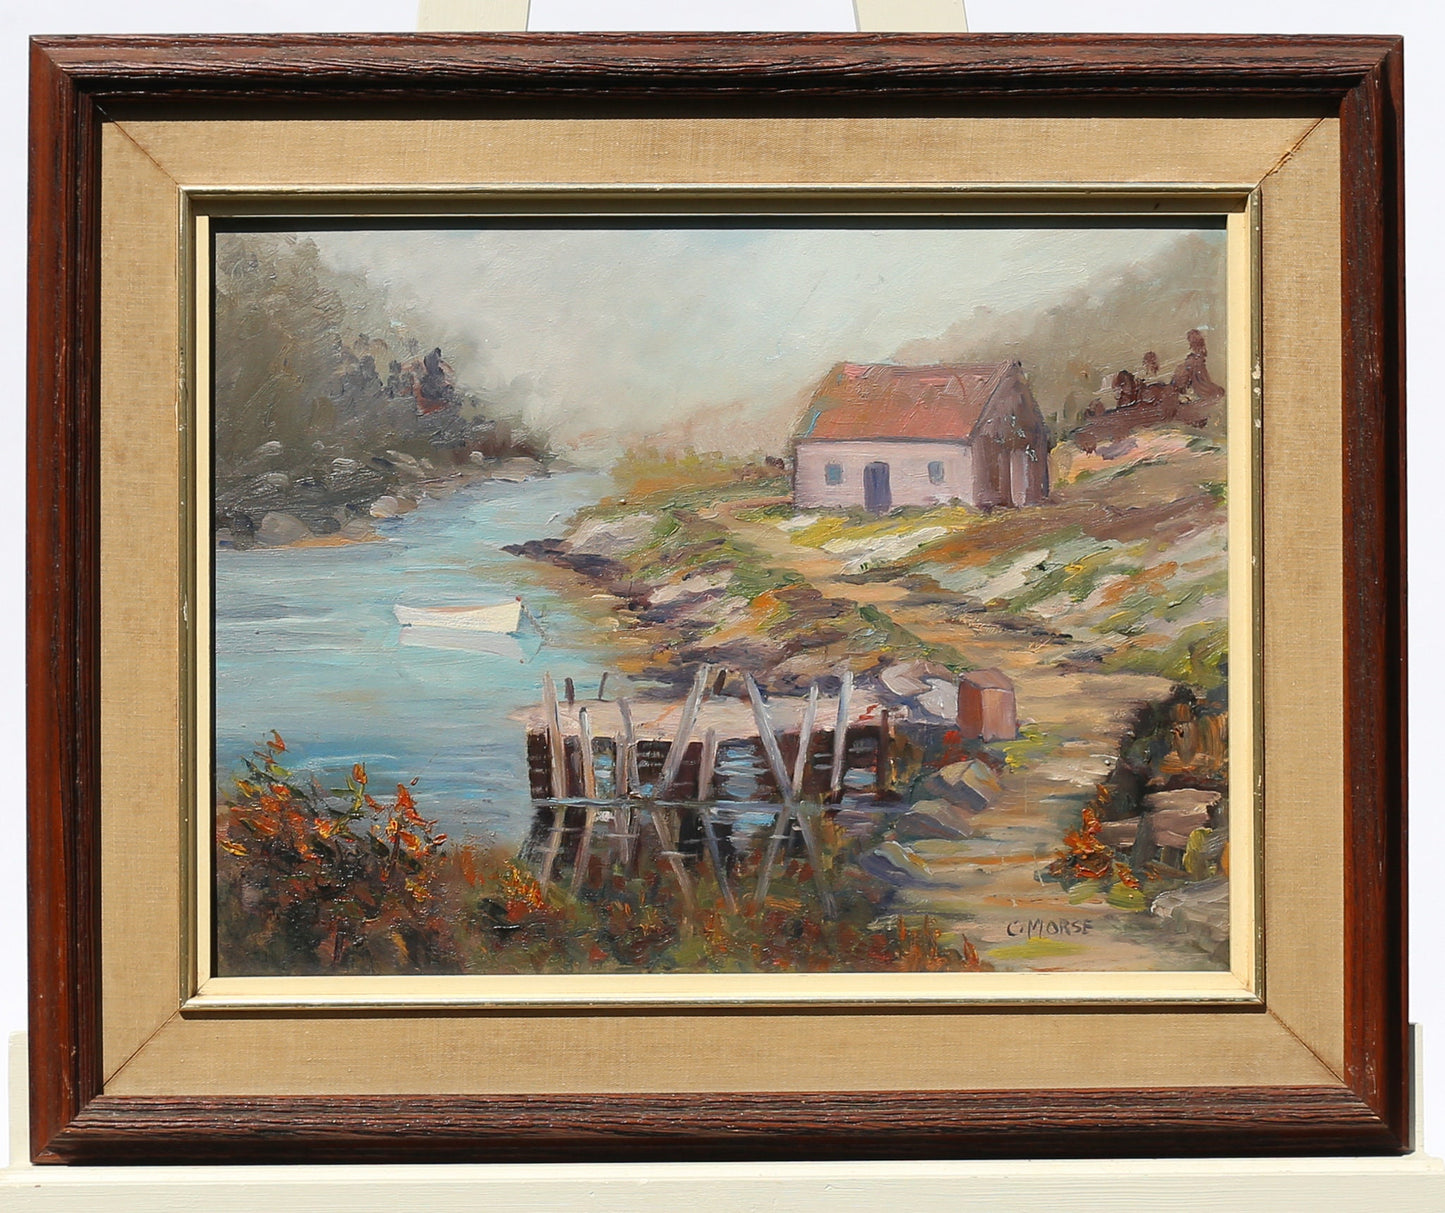 Oil Painting Signed American Impressionist River Harbor Cottage and Dory Rowboat 1970s Period Frame on Board